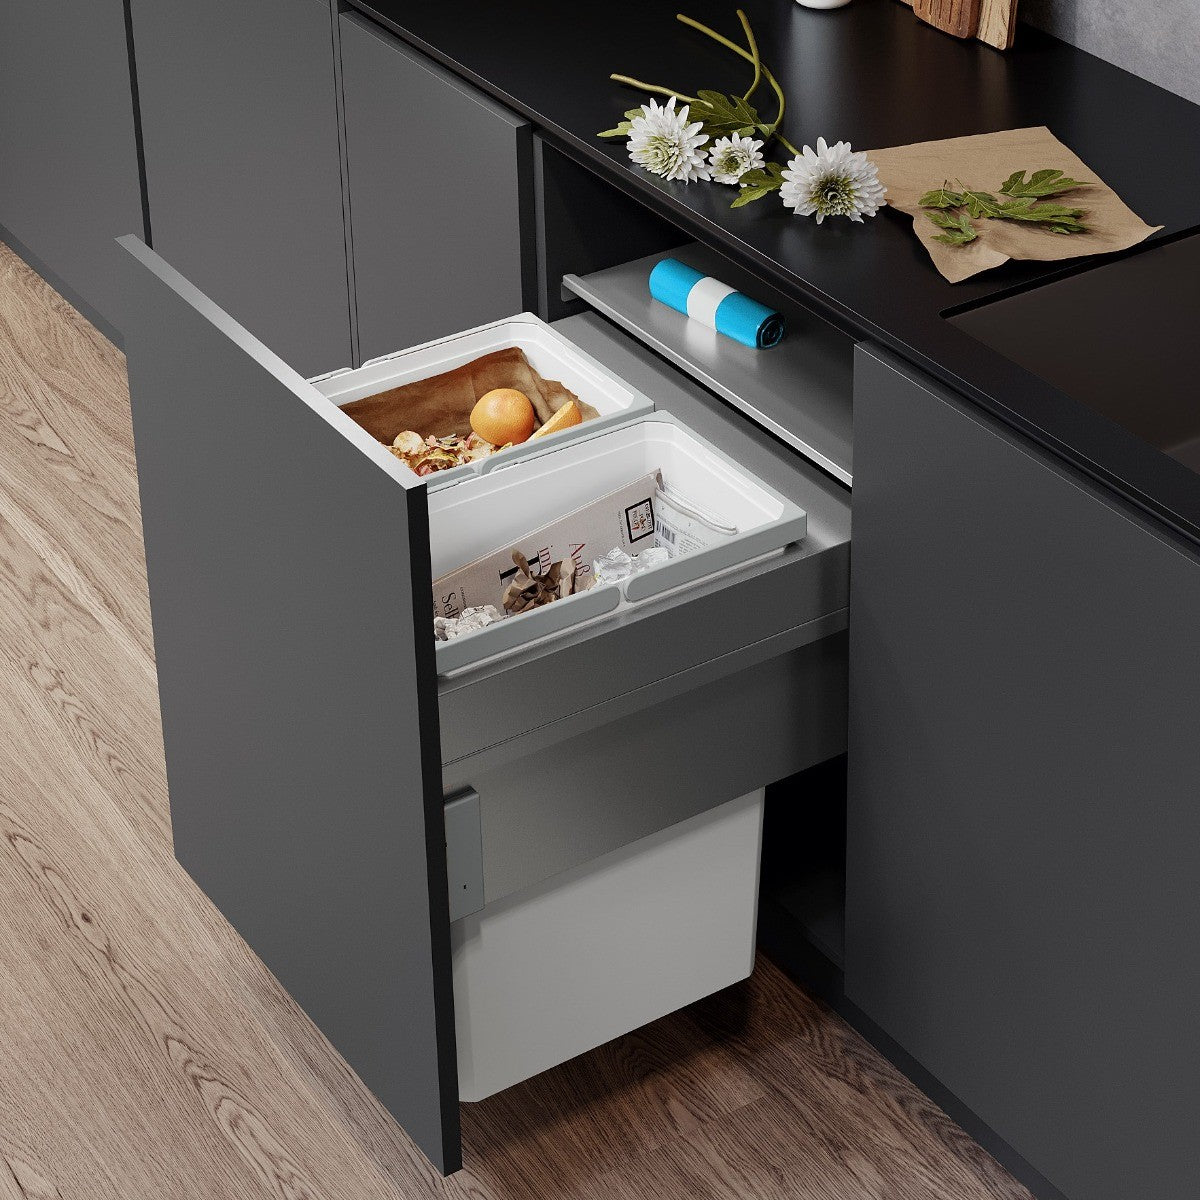 Dual-compartment Vauth-Sagel integrated kitchen bin, in silver grey colourway, for separating waste and recycling